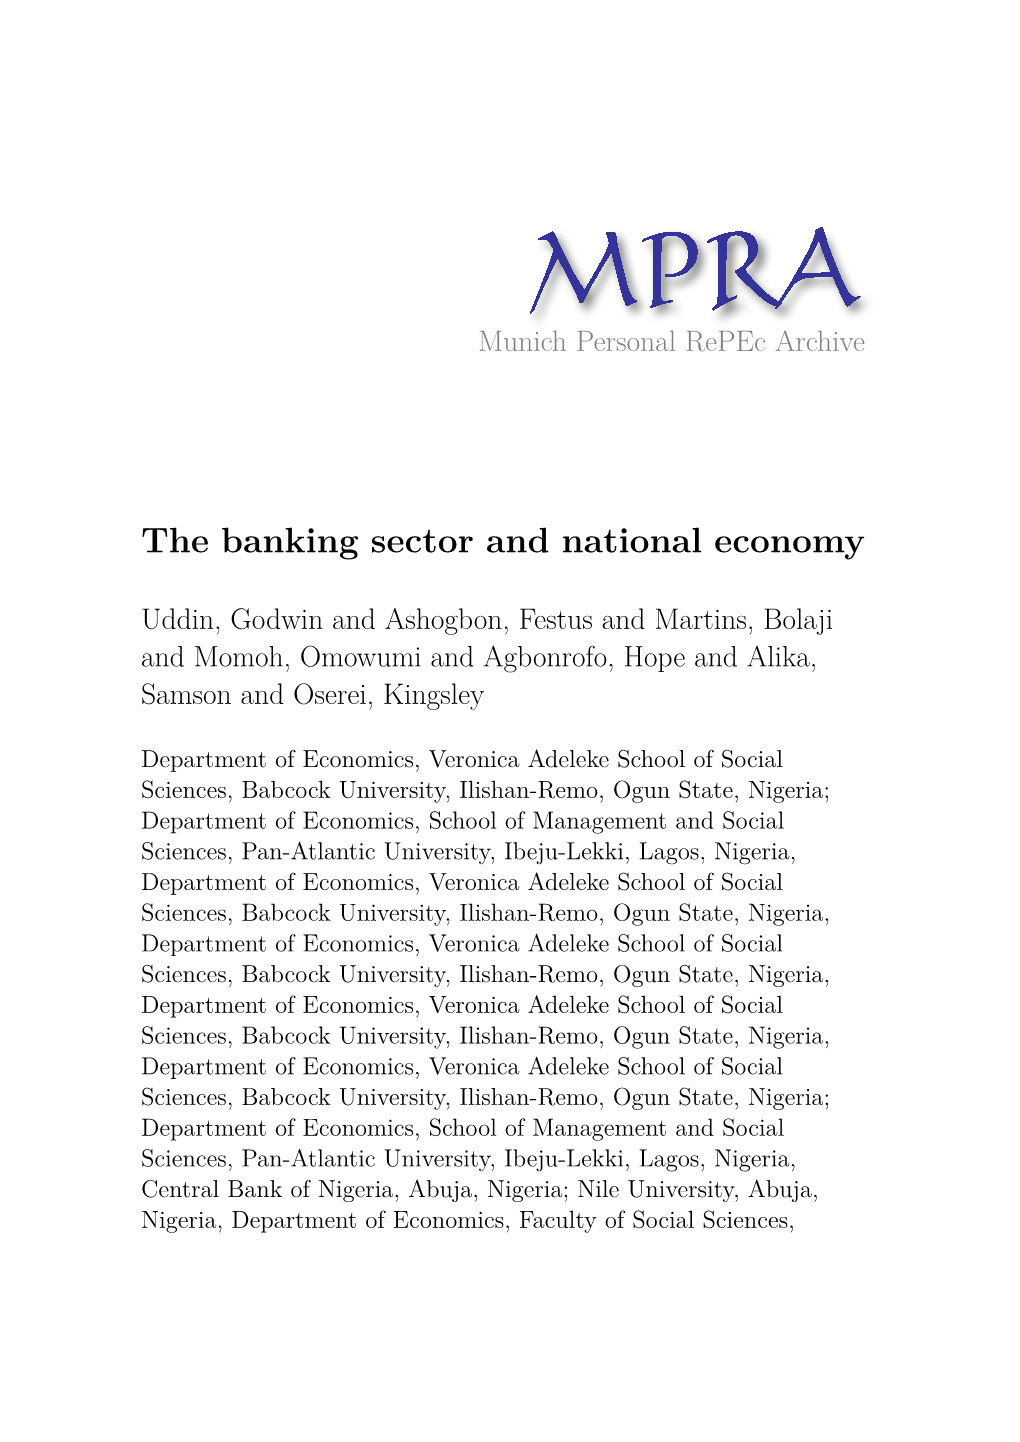 The Banking Sector and National Economy